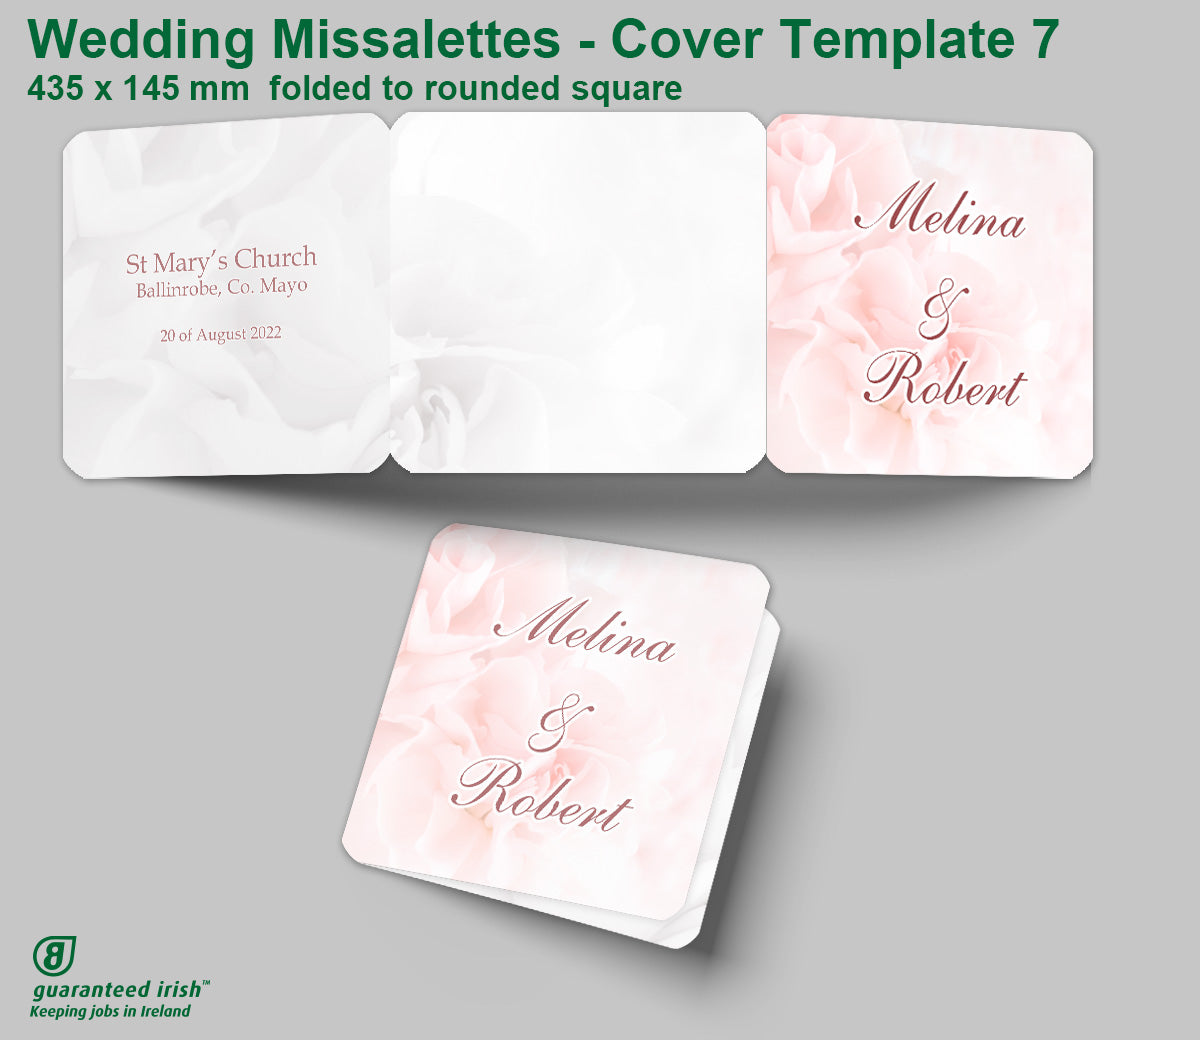 Wedding Missalettes - Cover Template 7 - rounded